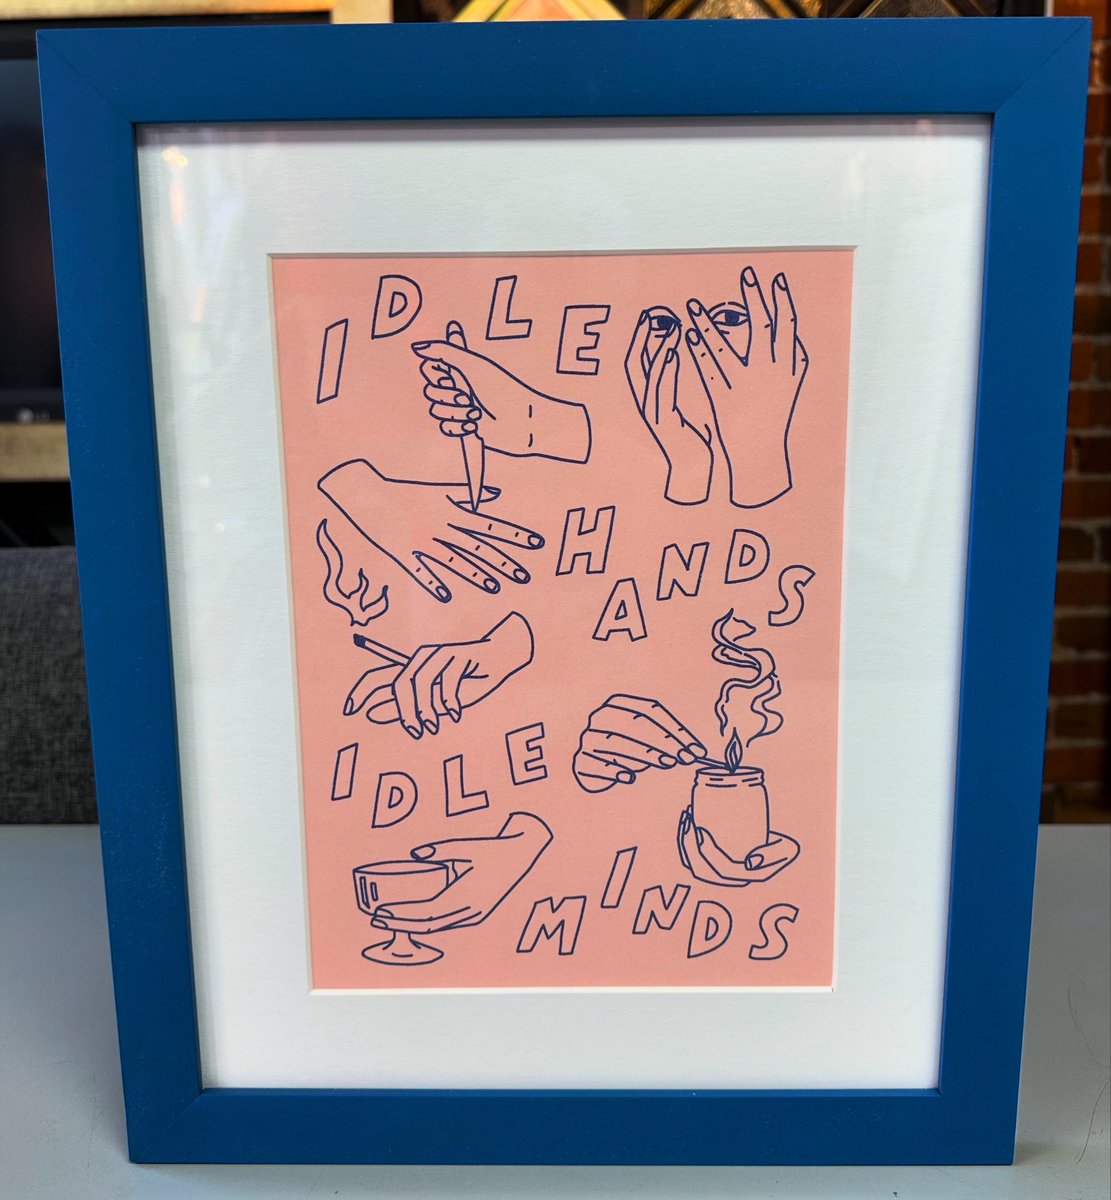 ‘Idle Hands’ by Is This Real Life? custom framed using acid-free matting, UV glass and frame by AMPF Moulding! #art #denver #colorado #pictureframing #customframing #5280customframing #idlehands #isthisreallifestudio @truvueglazing @Crescent_CP